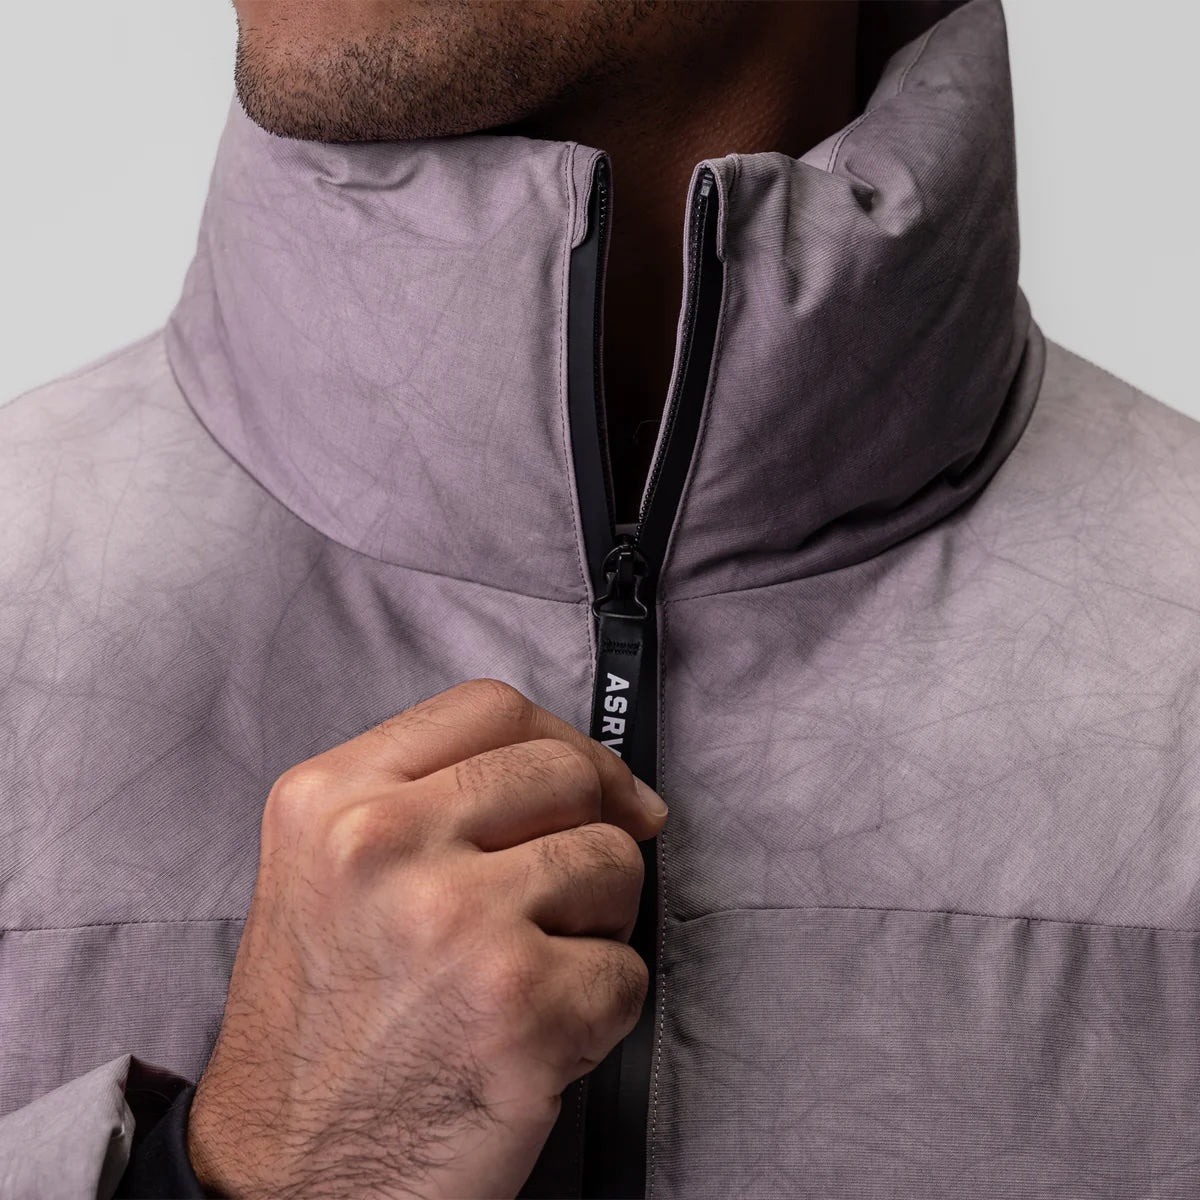 Weather-Ready Down Puffer Jacket